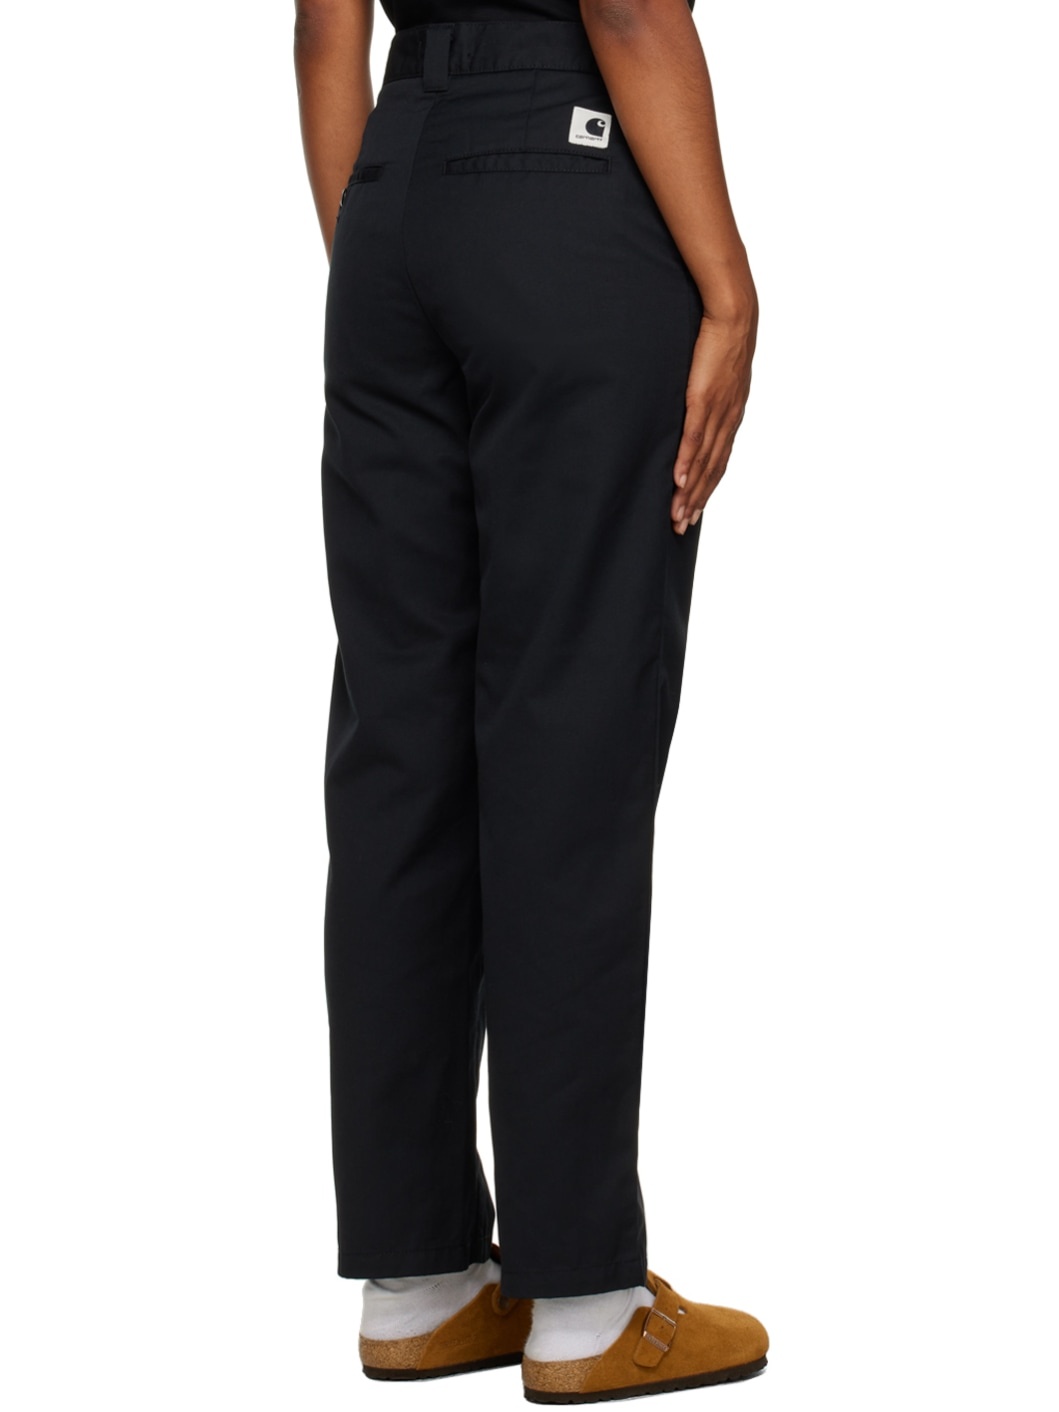 Black Master Trousers - 3